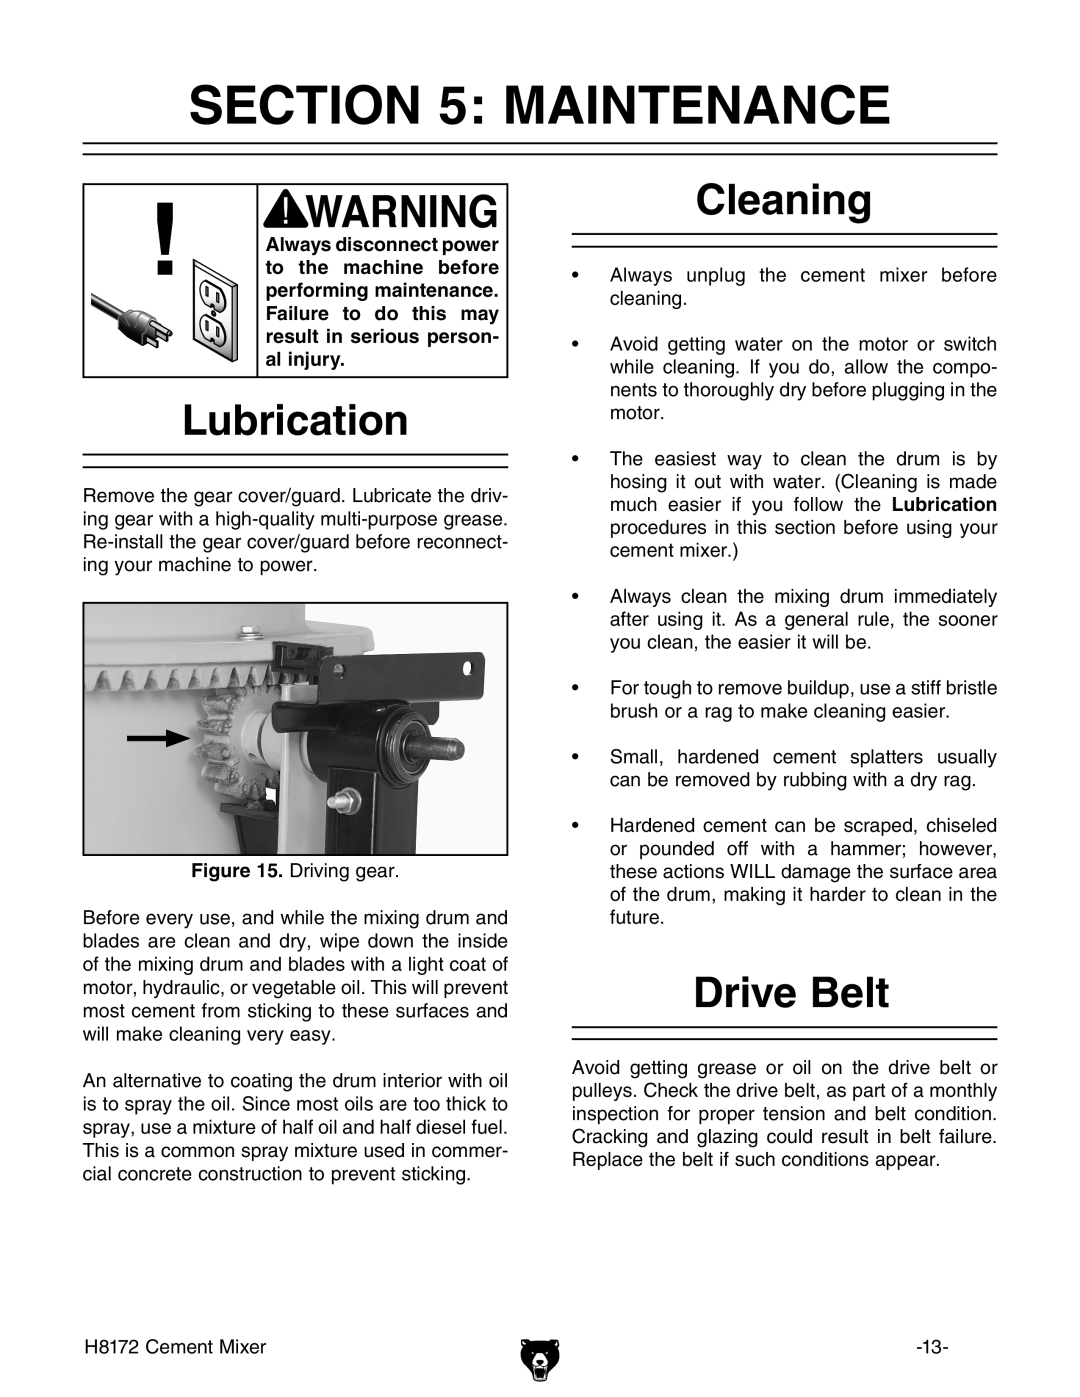 Grizzly H8172 owner manual Maintenance, Lubrication, Cleaning, Drive Belt 